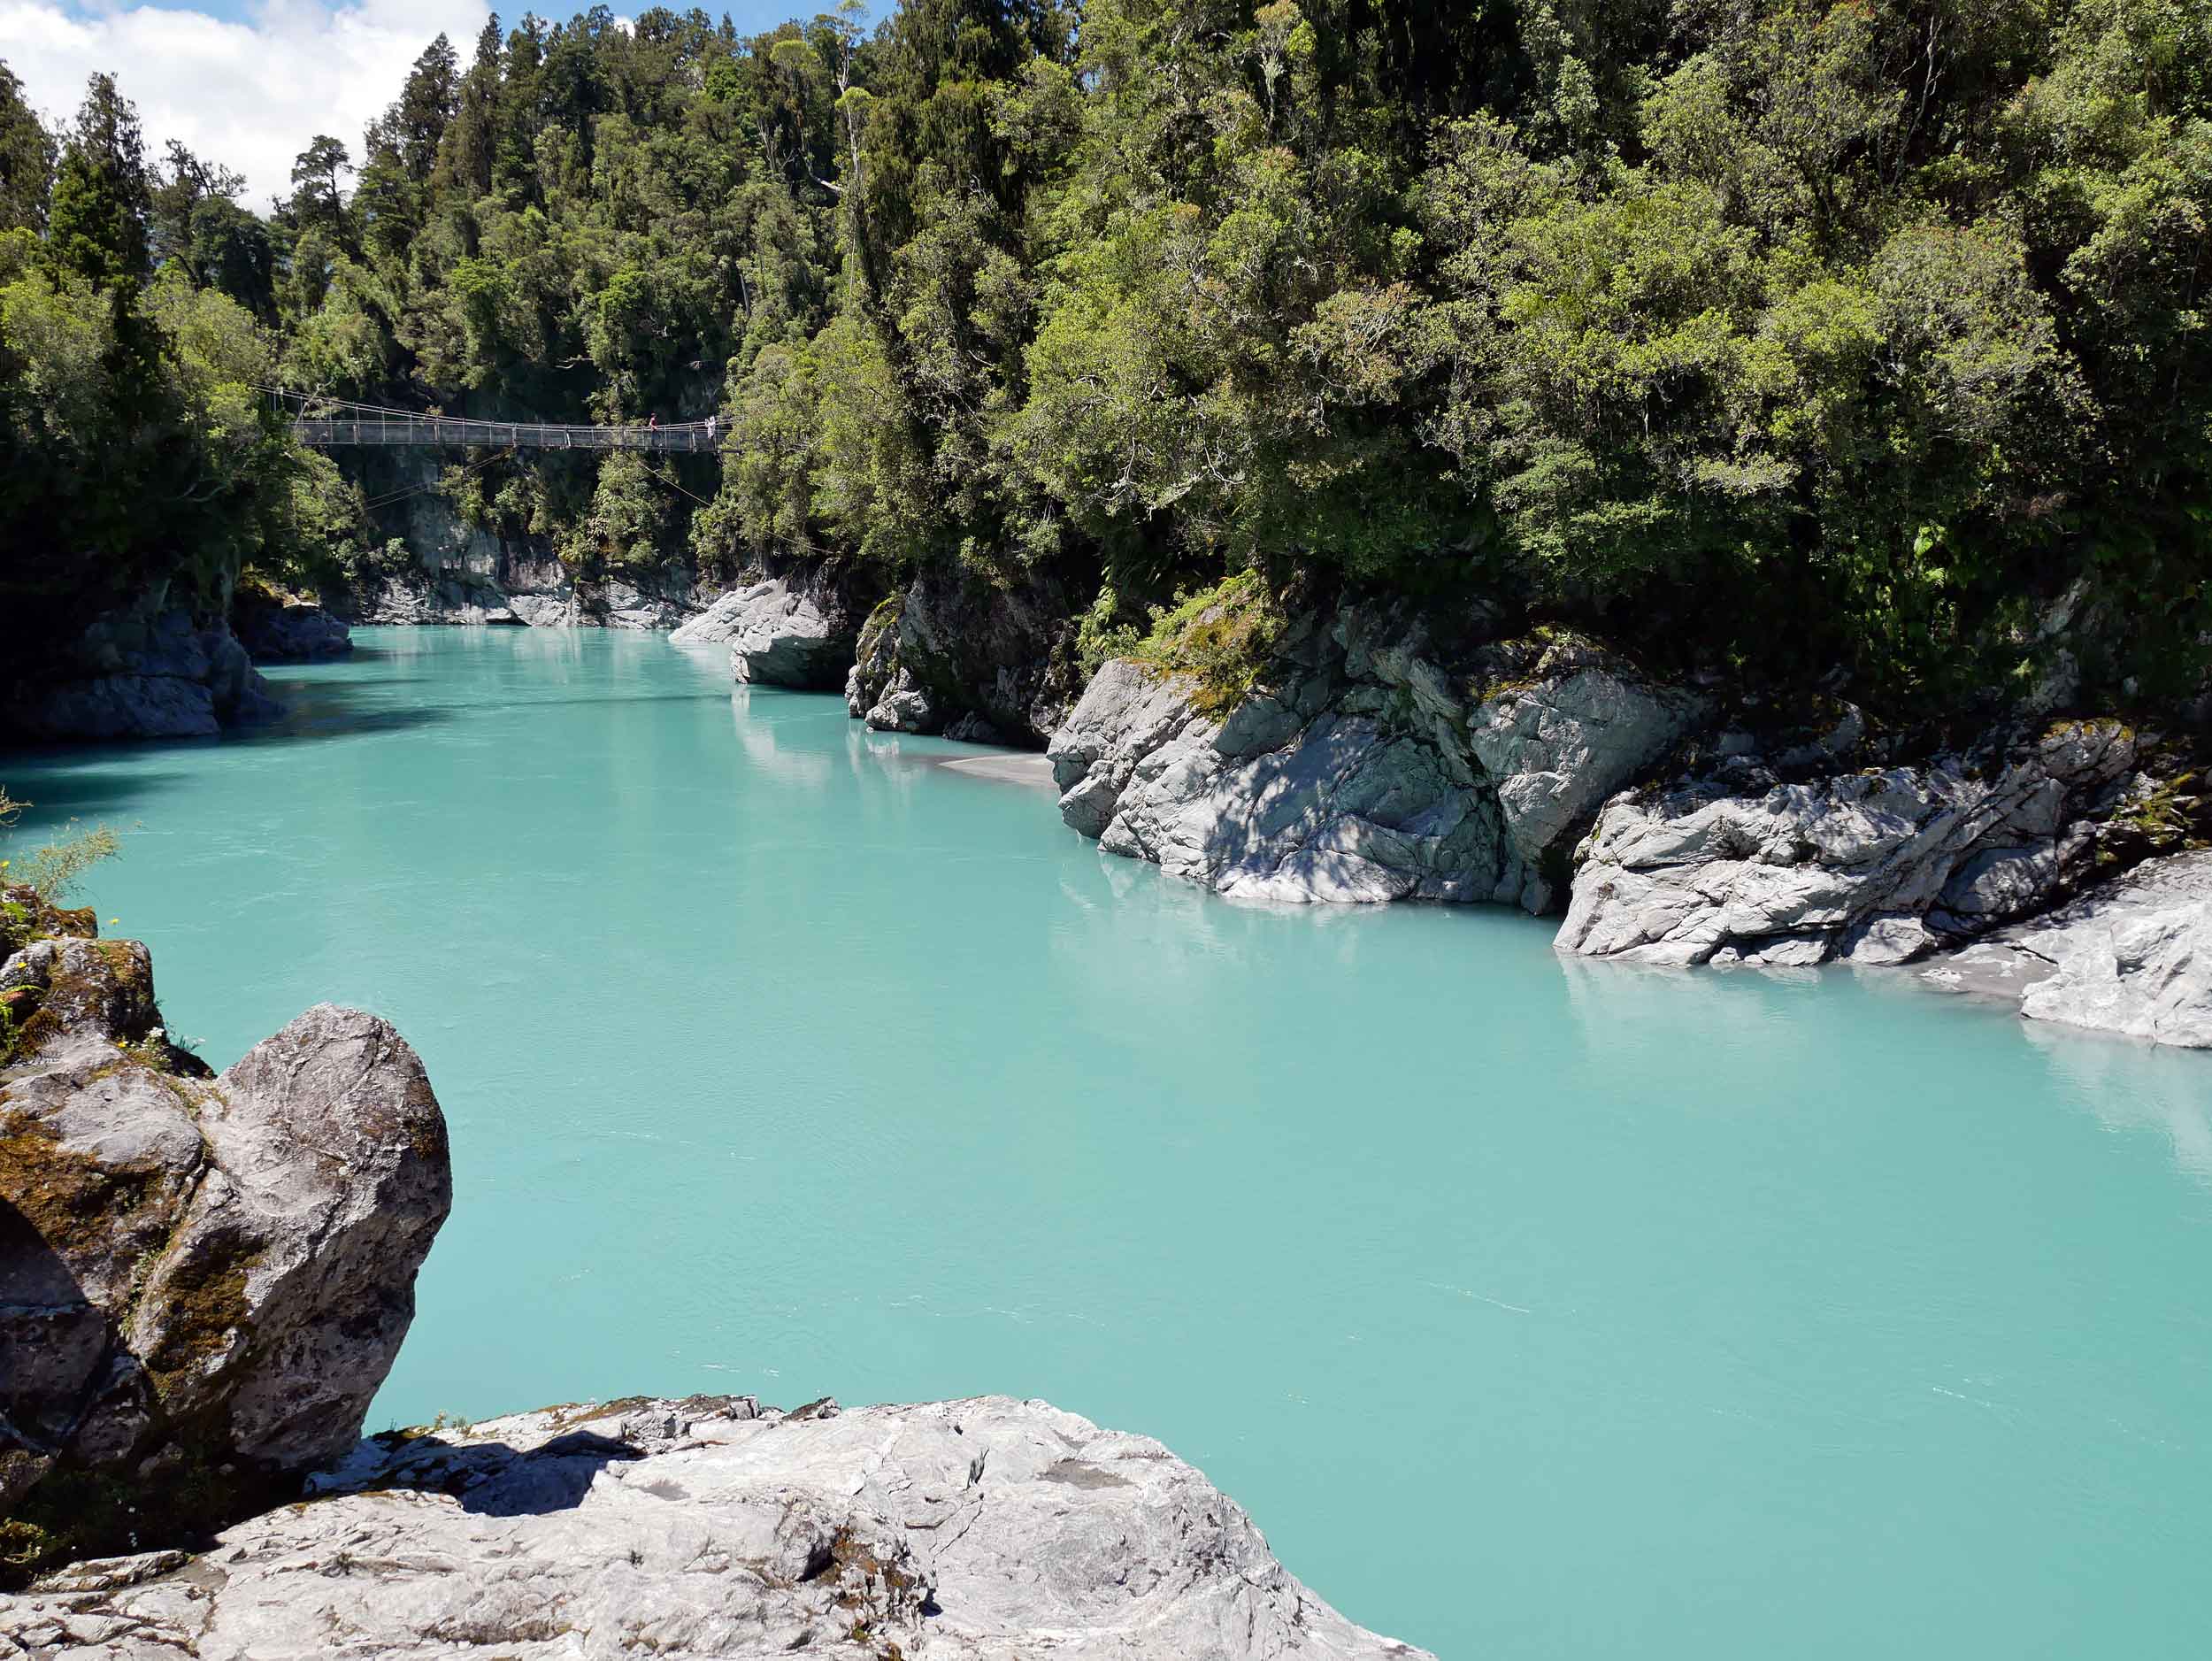  Once on the West Coast, we visited the town of Hokitika and the incredible Hokitika Gorge with unreal ice blue water (no filter here!) and a famous swing bridge (Jan 5).&nbsp; 